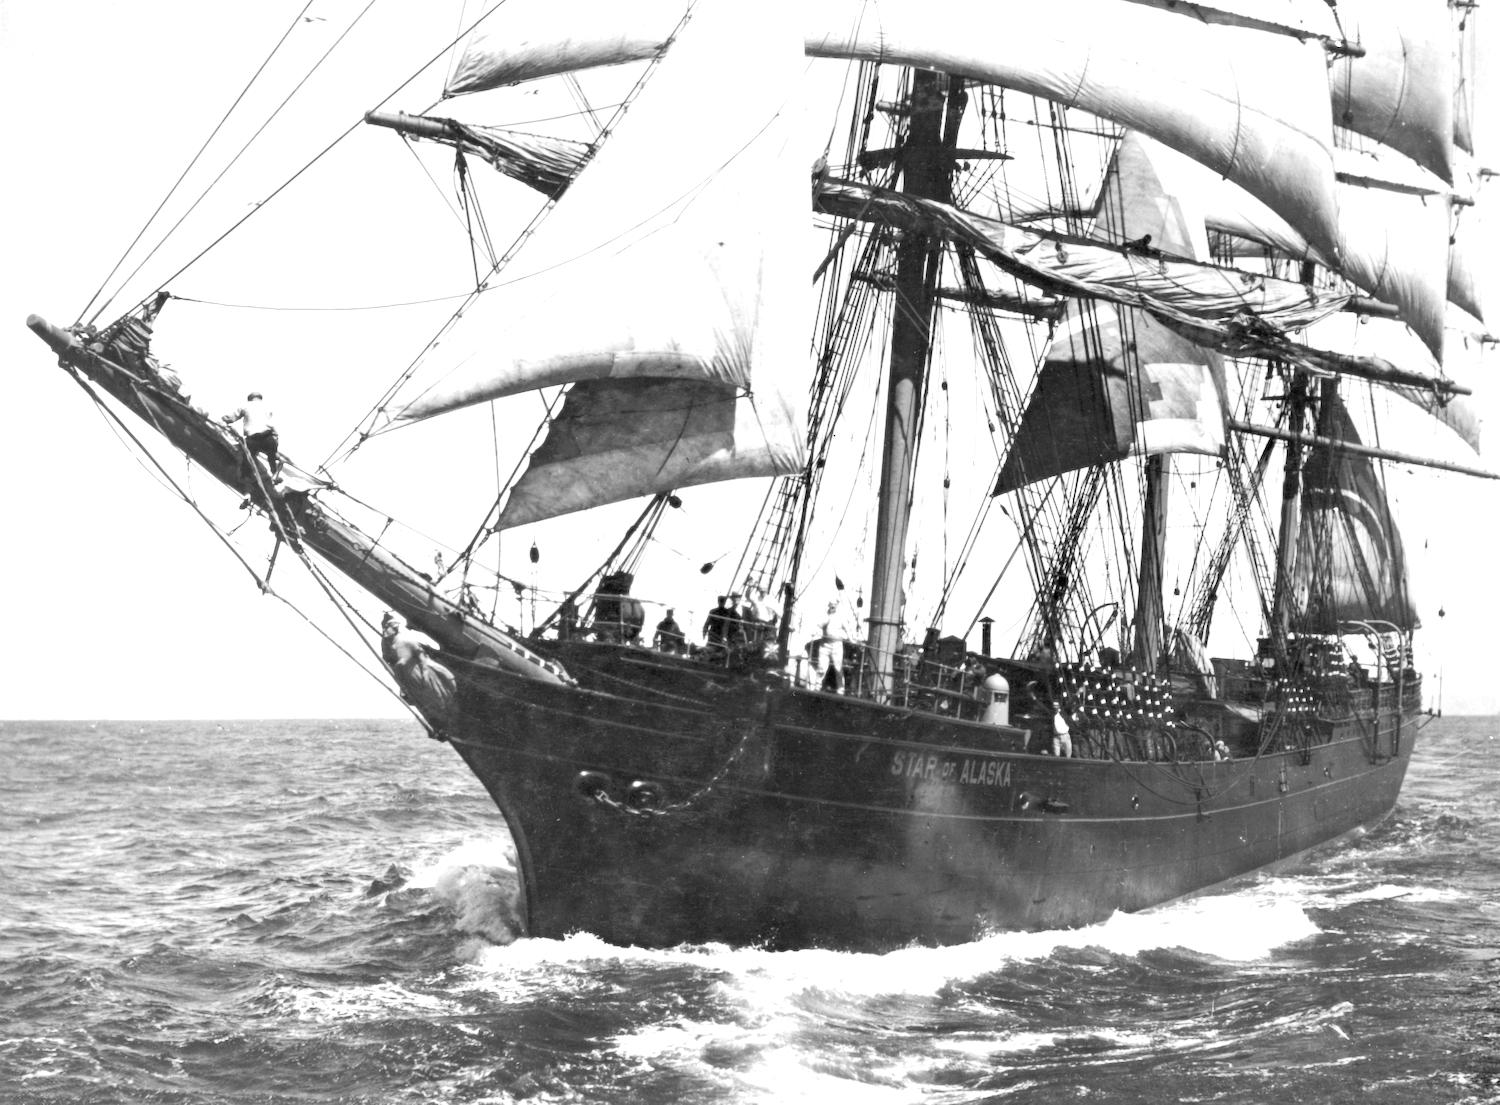 When the full rigged BALCLUTHA was a member of the Alaska Packer's Association in the early 1900s, she was named the STAR of ALASKA/NPS